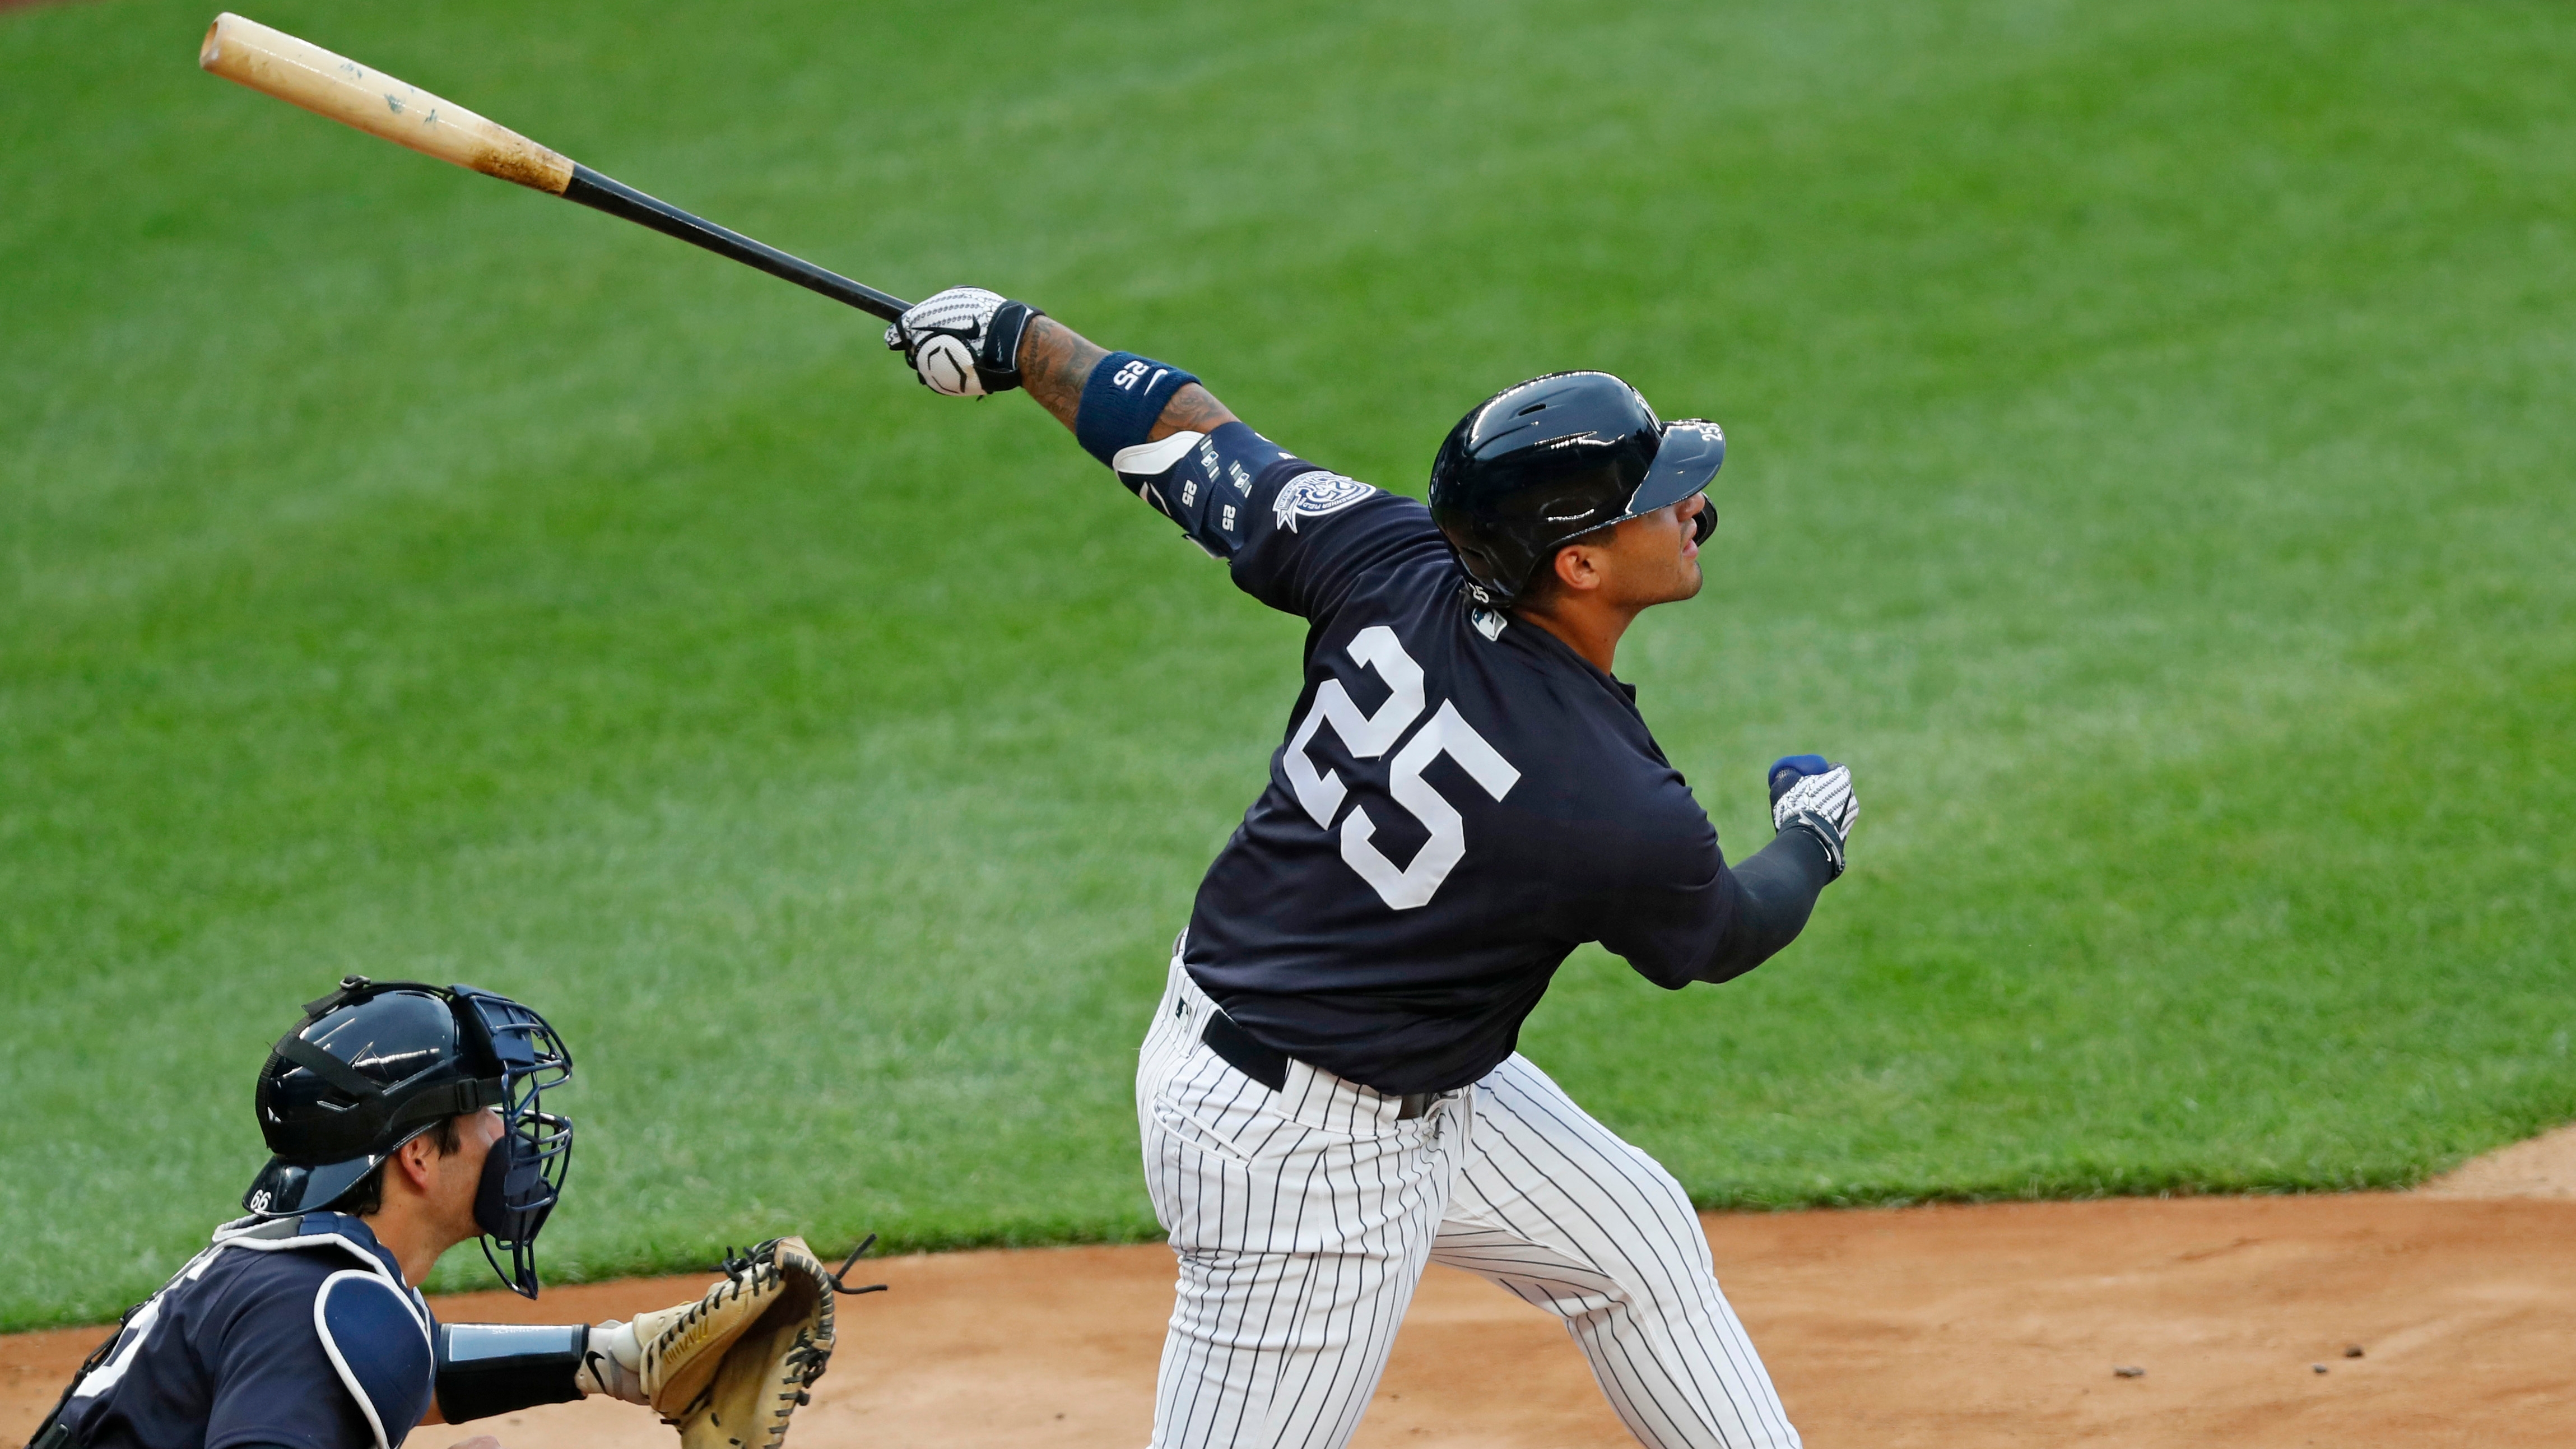 It's March, but Gleyber Torres Is Already Building for October